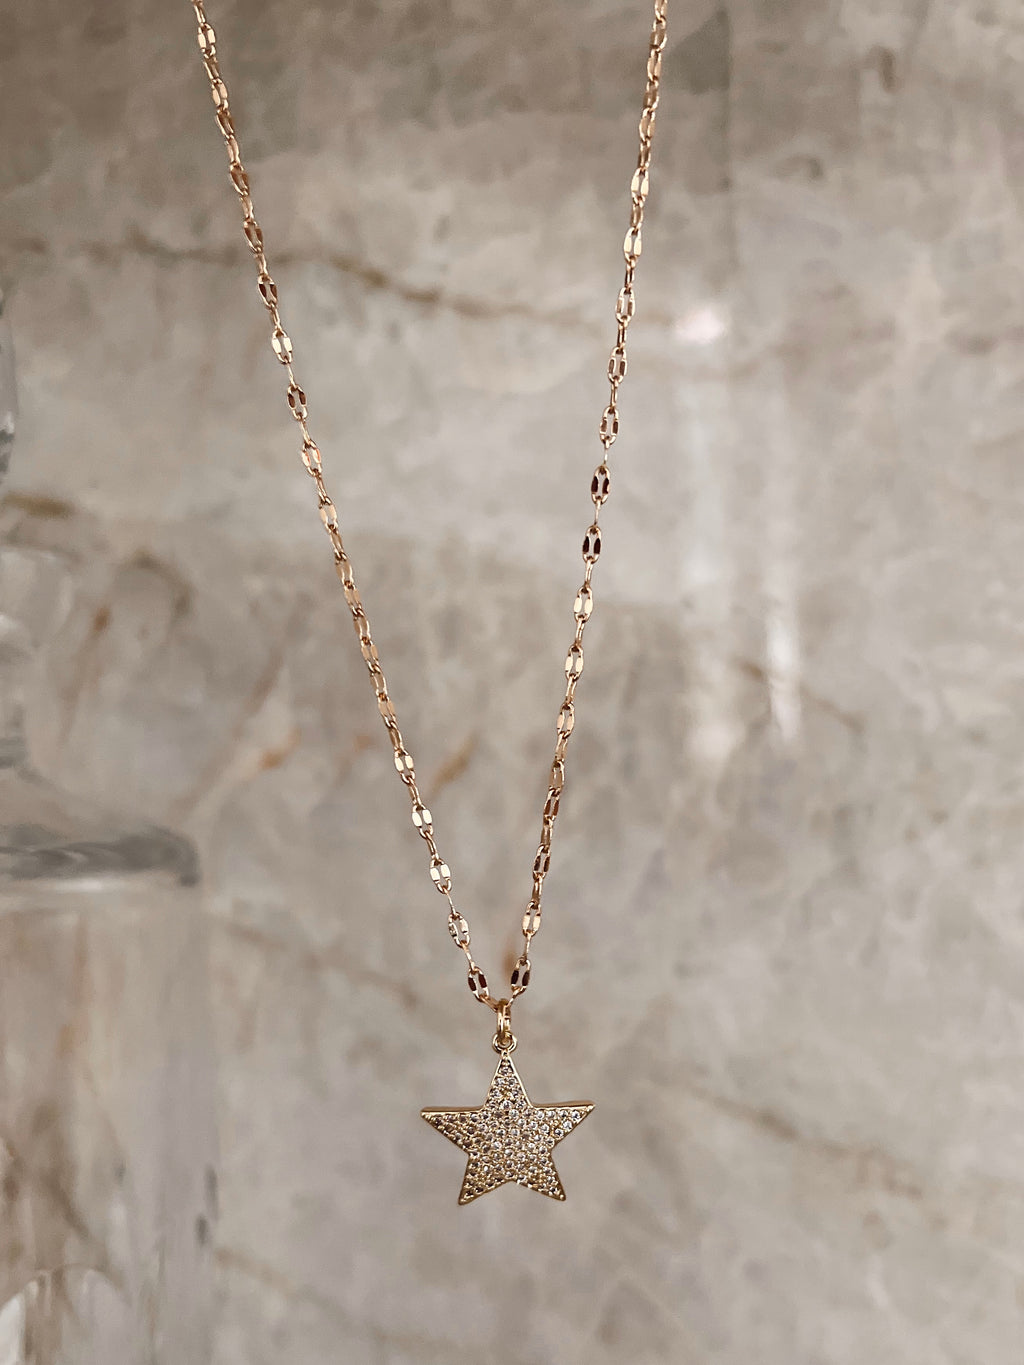 SPARKLY STAR NECKLACE